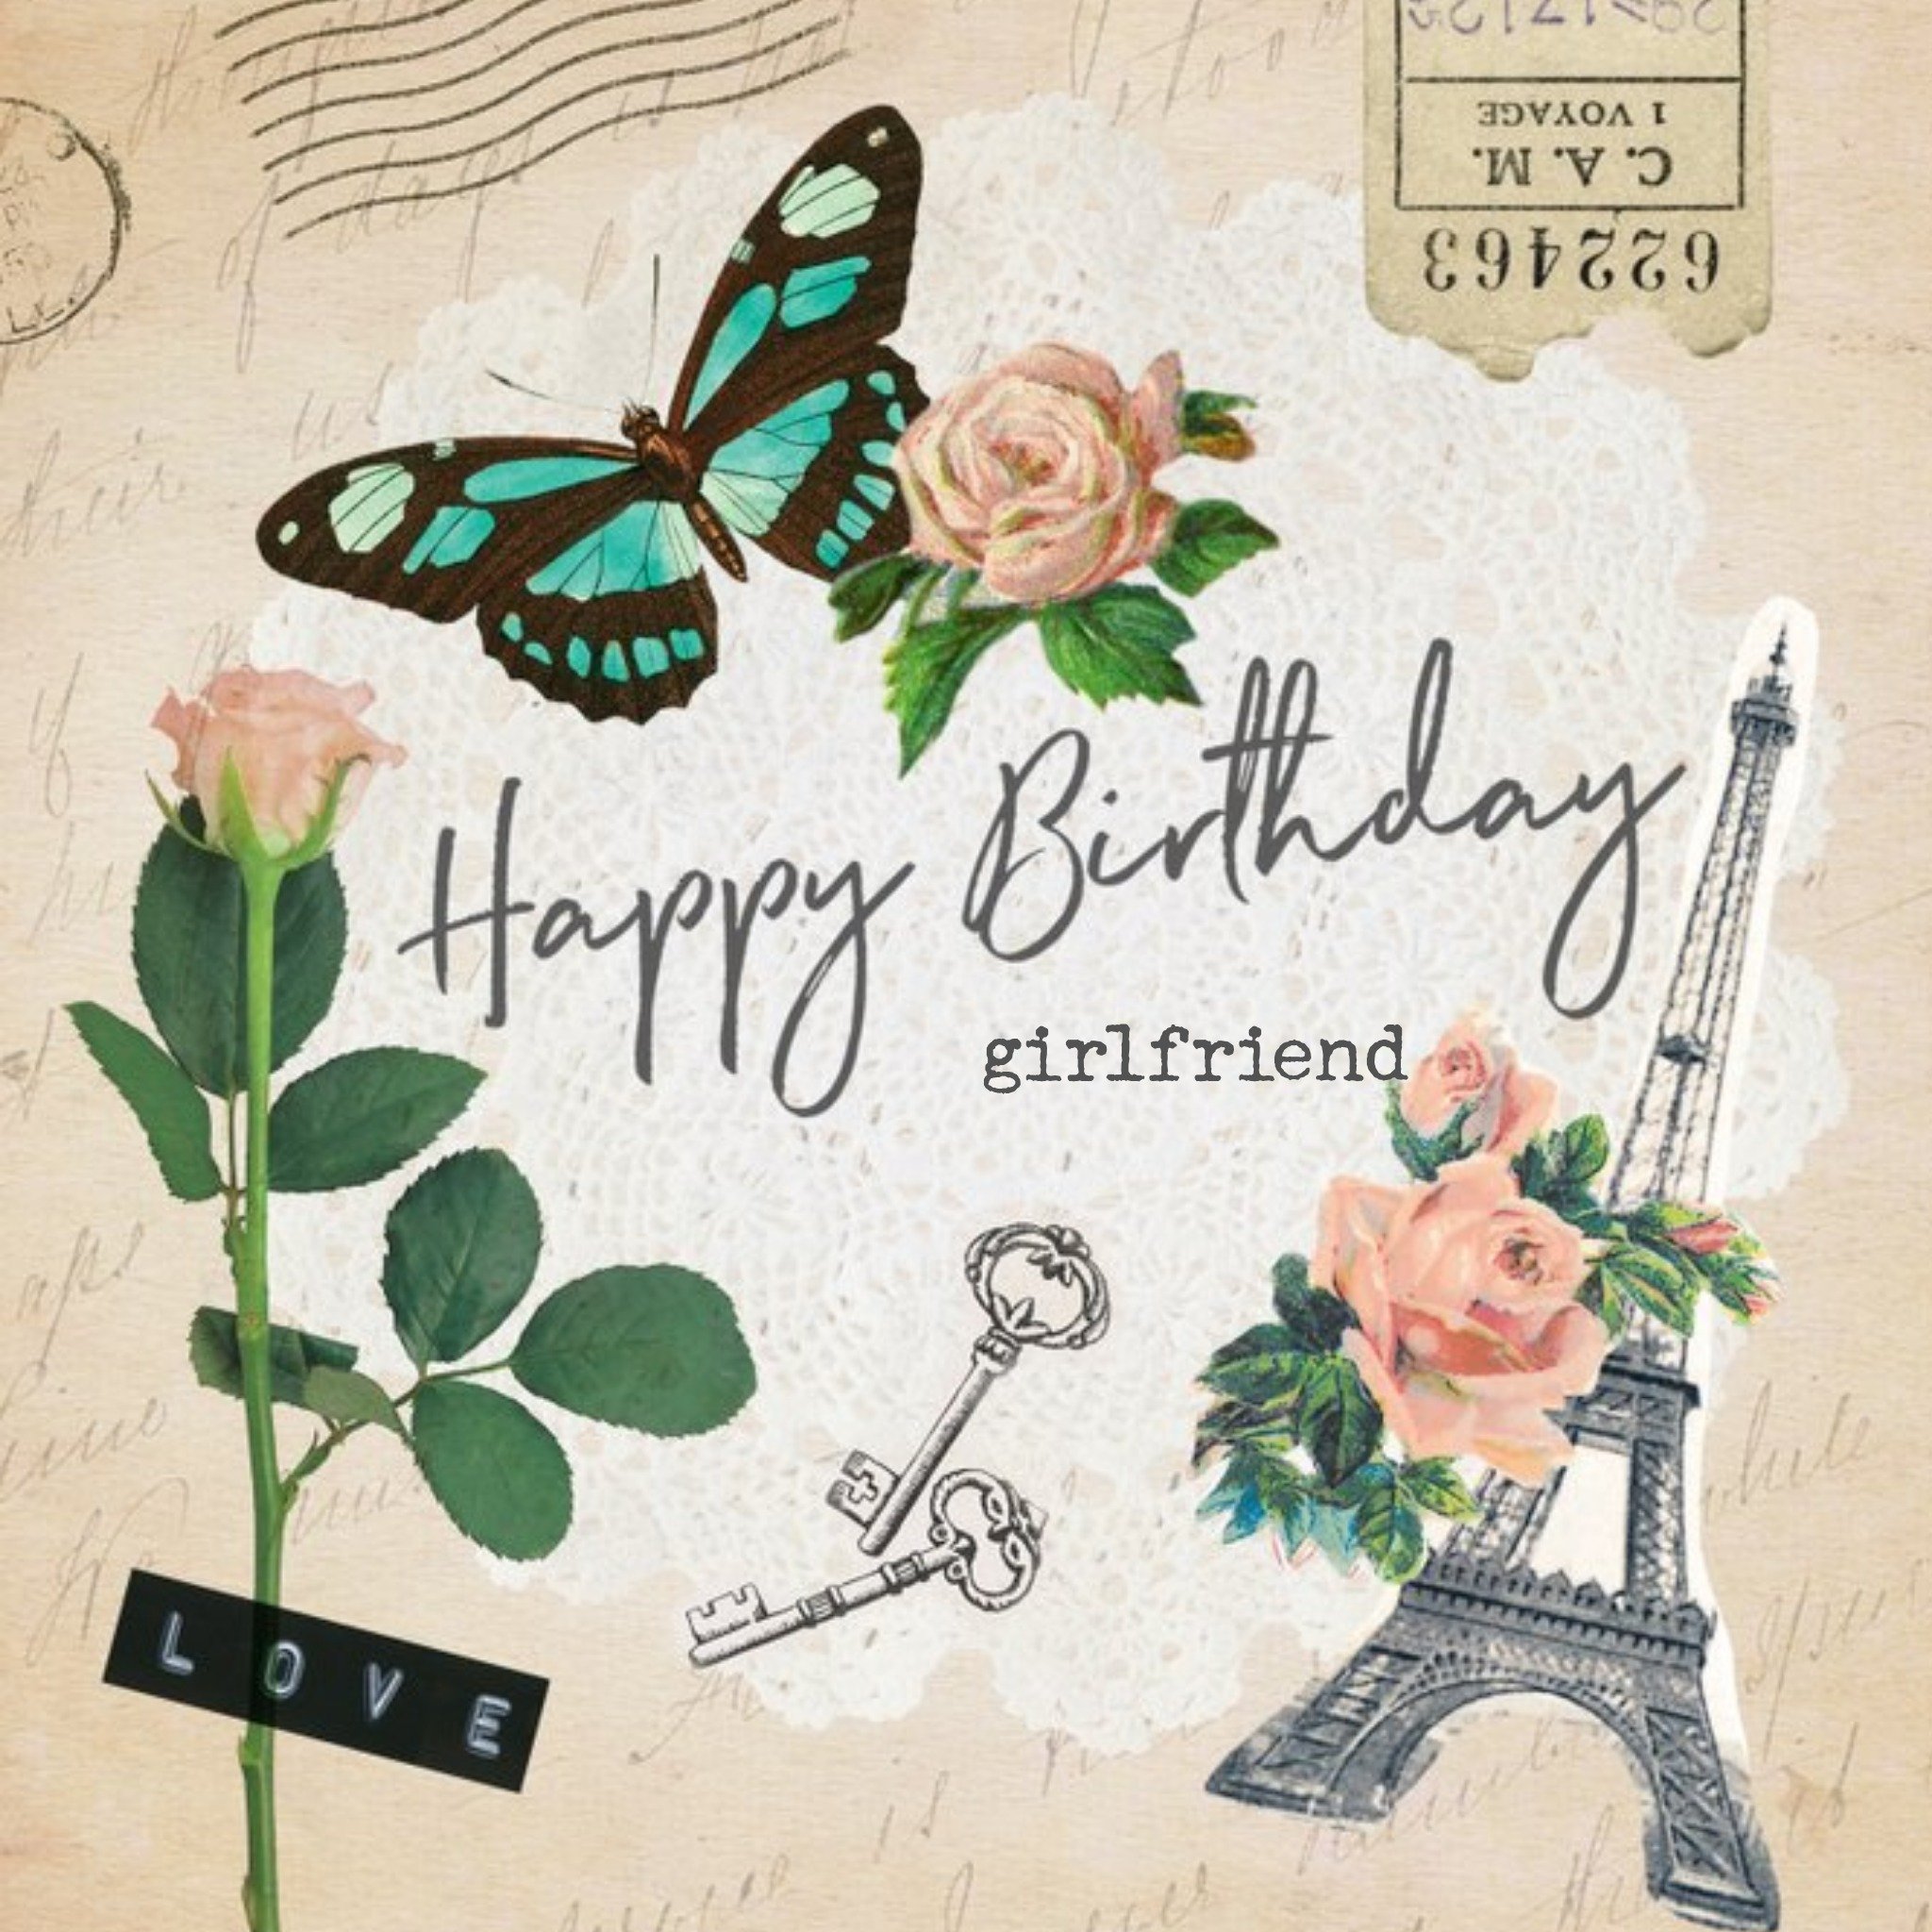 Moonpig Vintage Paris Birthday Card - Traditional Happy Birthday Card For Girlfriend, Large